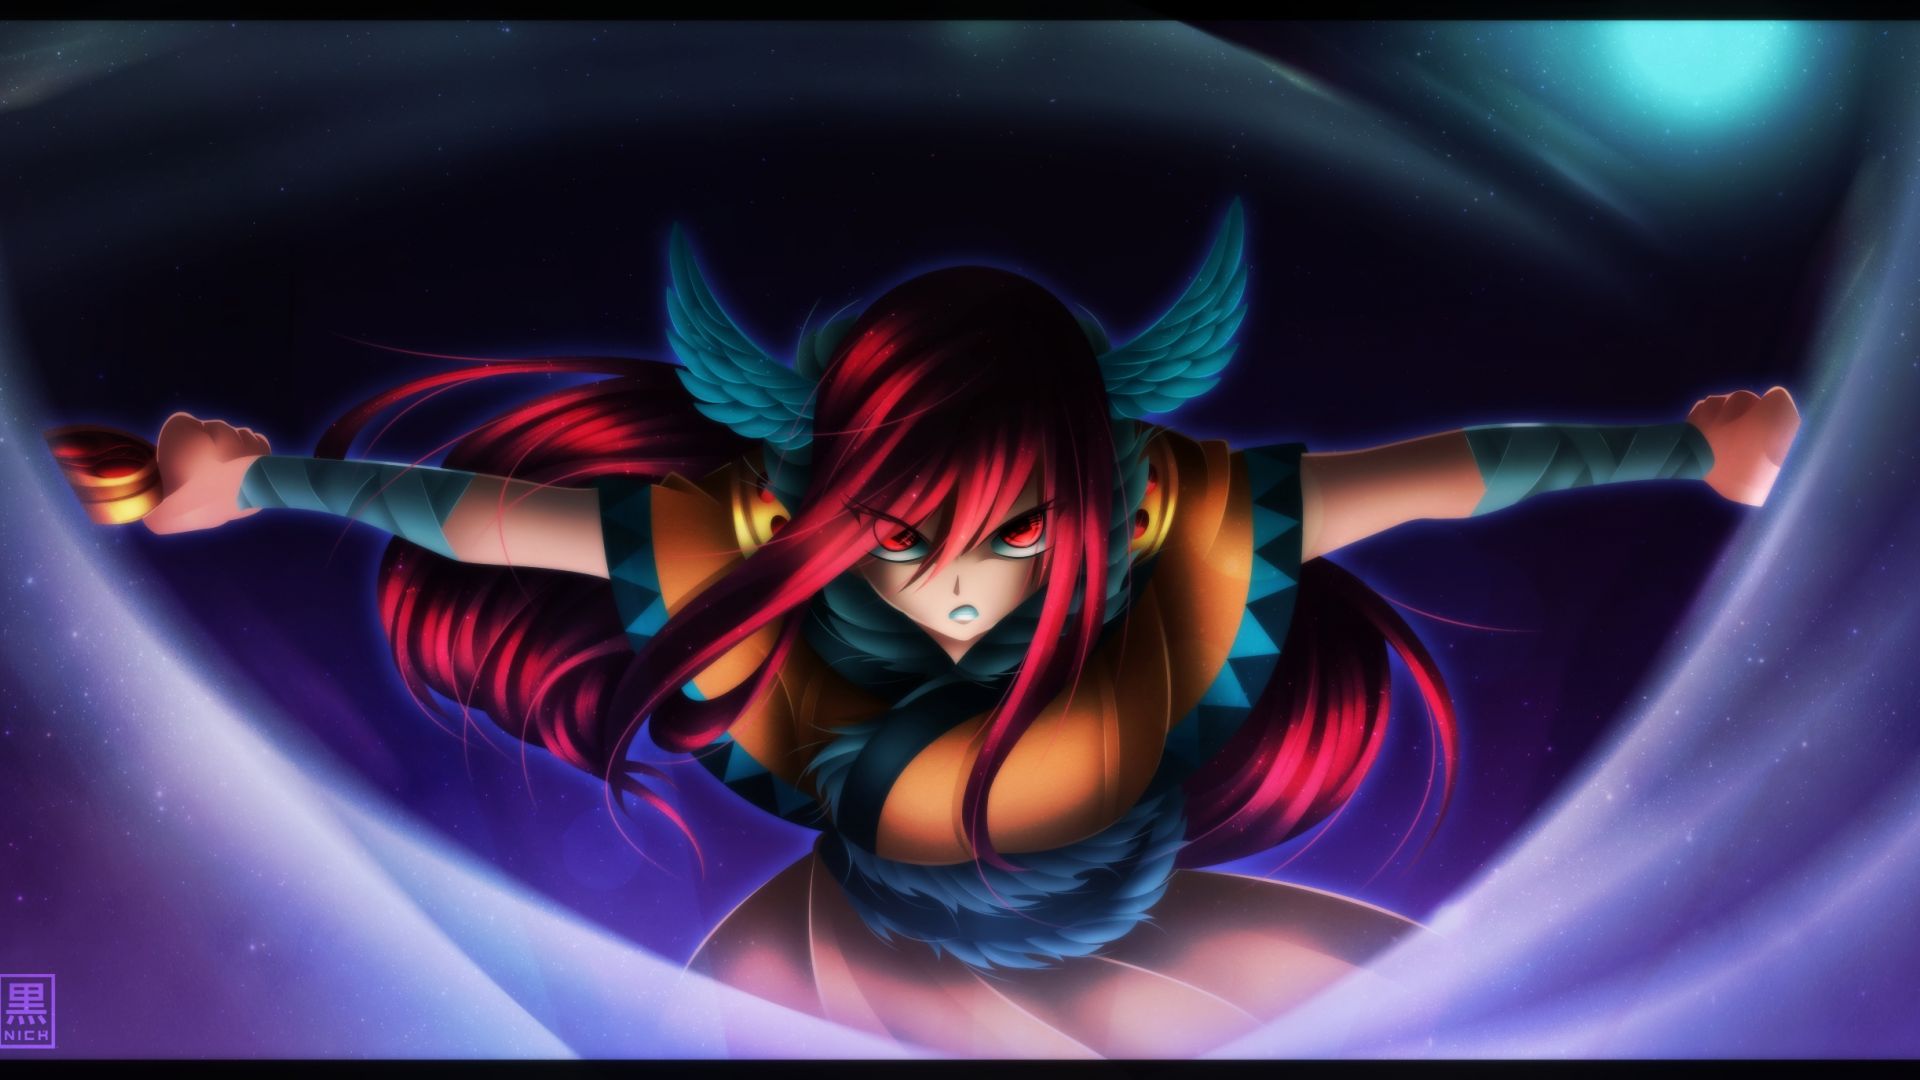 Learn 98+ about erza scarlet wallpaper latest .vn